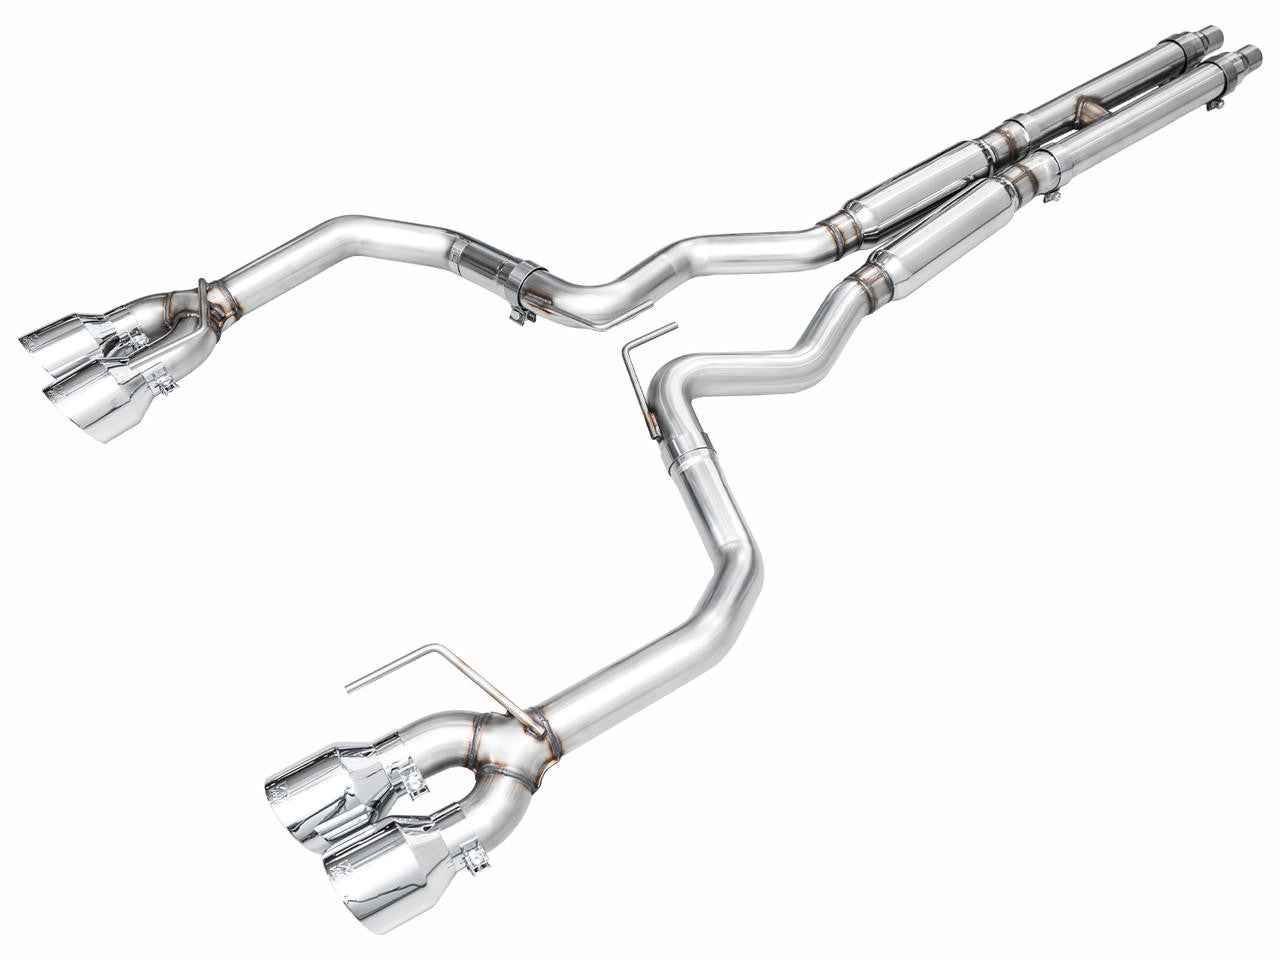 AWE Tuning AWE Track Edition Exhaust for S650 Mustang Dark Horse - Quad Chrome Silver Tips 3020-42375 